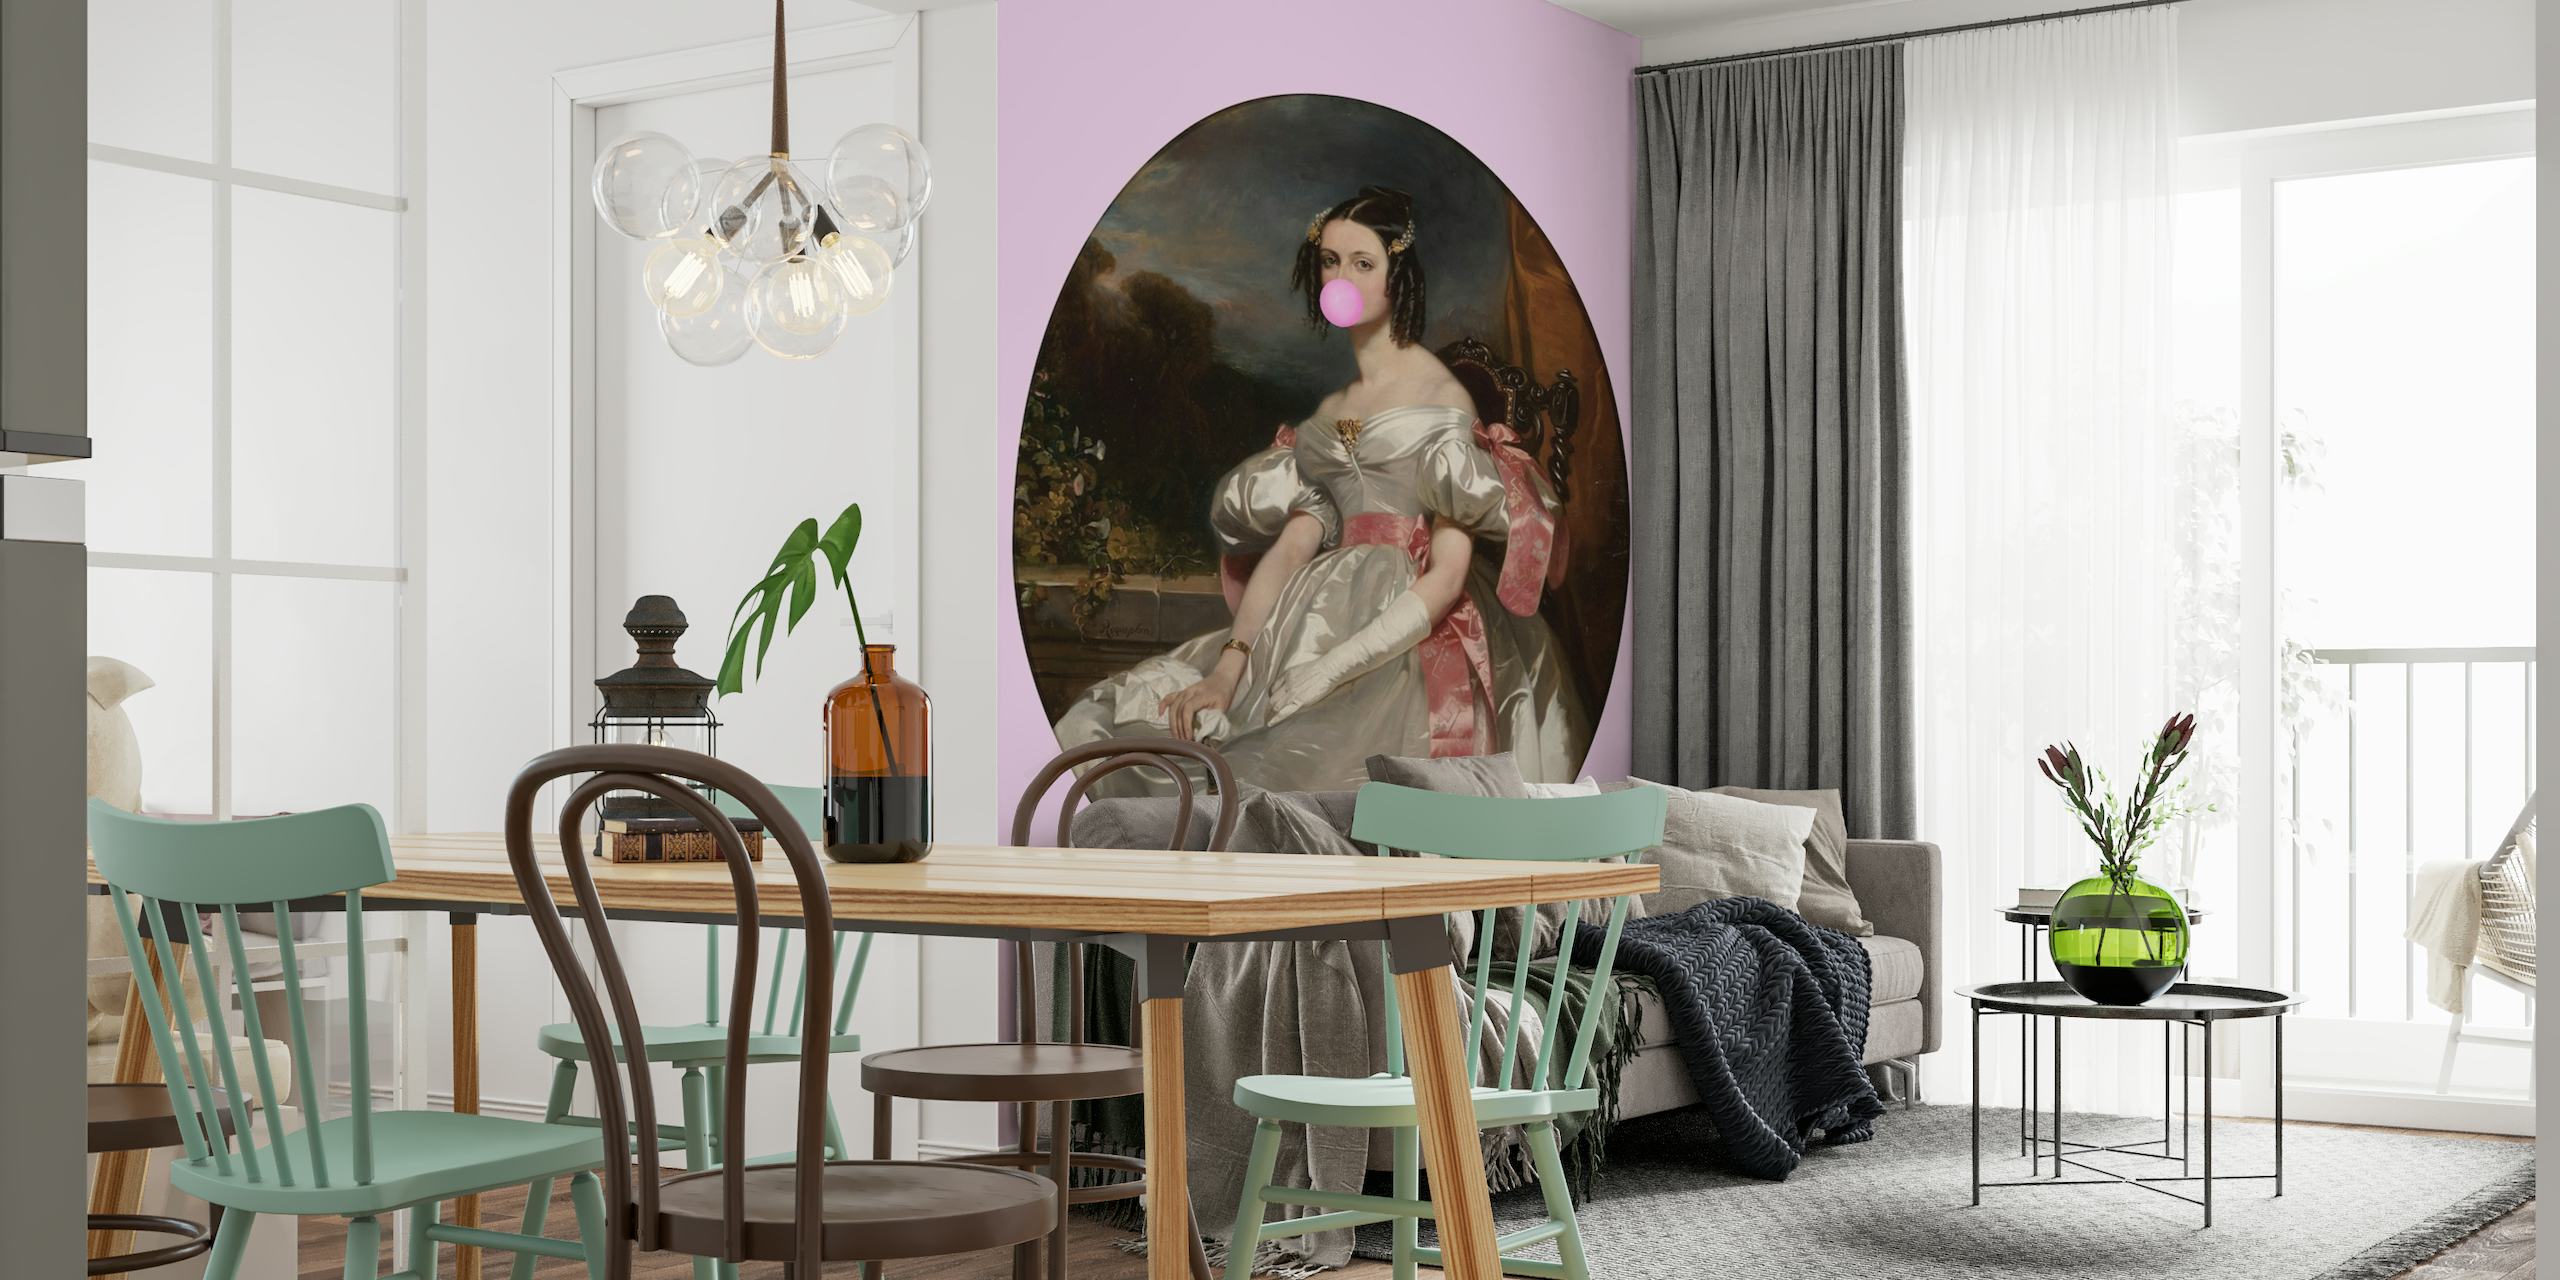 Historical portrait with modern twist featuring Pink Bubble-Gum Lady V